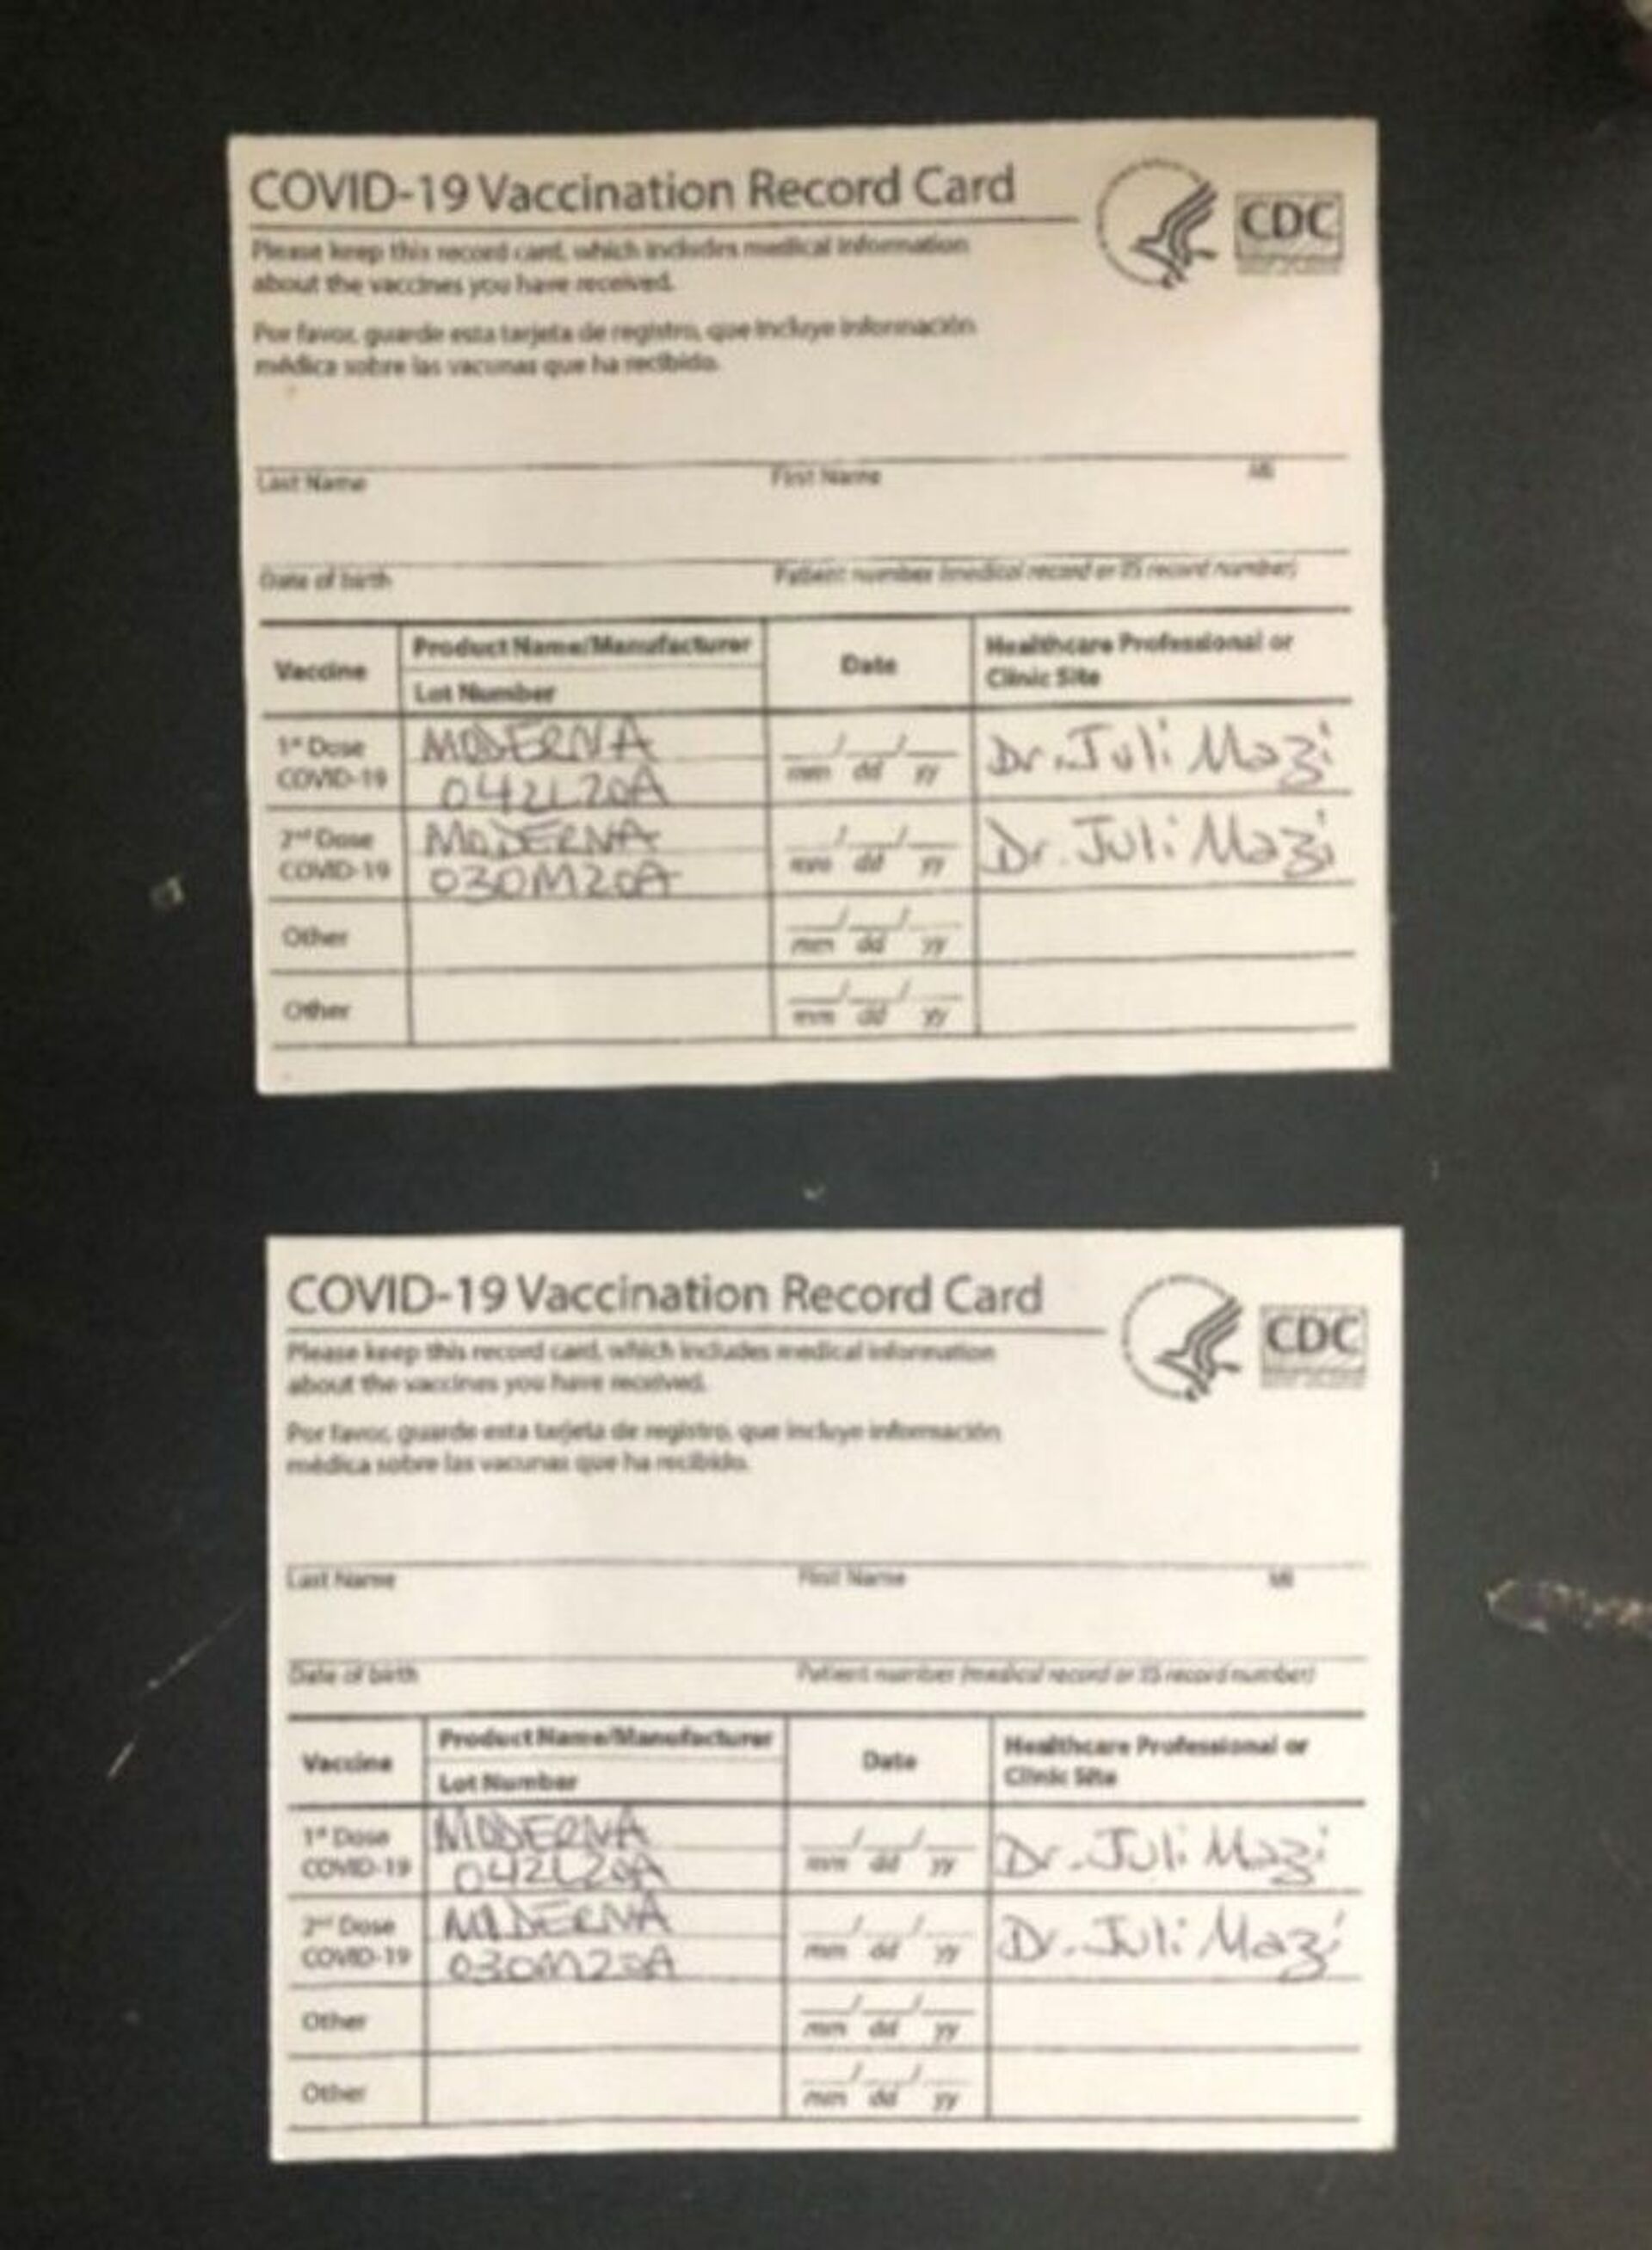 Image provided by the US Department of Justice captures two falsified COVID-19 vaccination cards that were allegedly handed out by Juli A. Mazi, a California-licensed homeopathic physician.  - Sputnik International, 1920, 07.09.2021